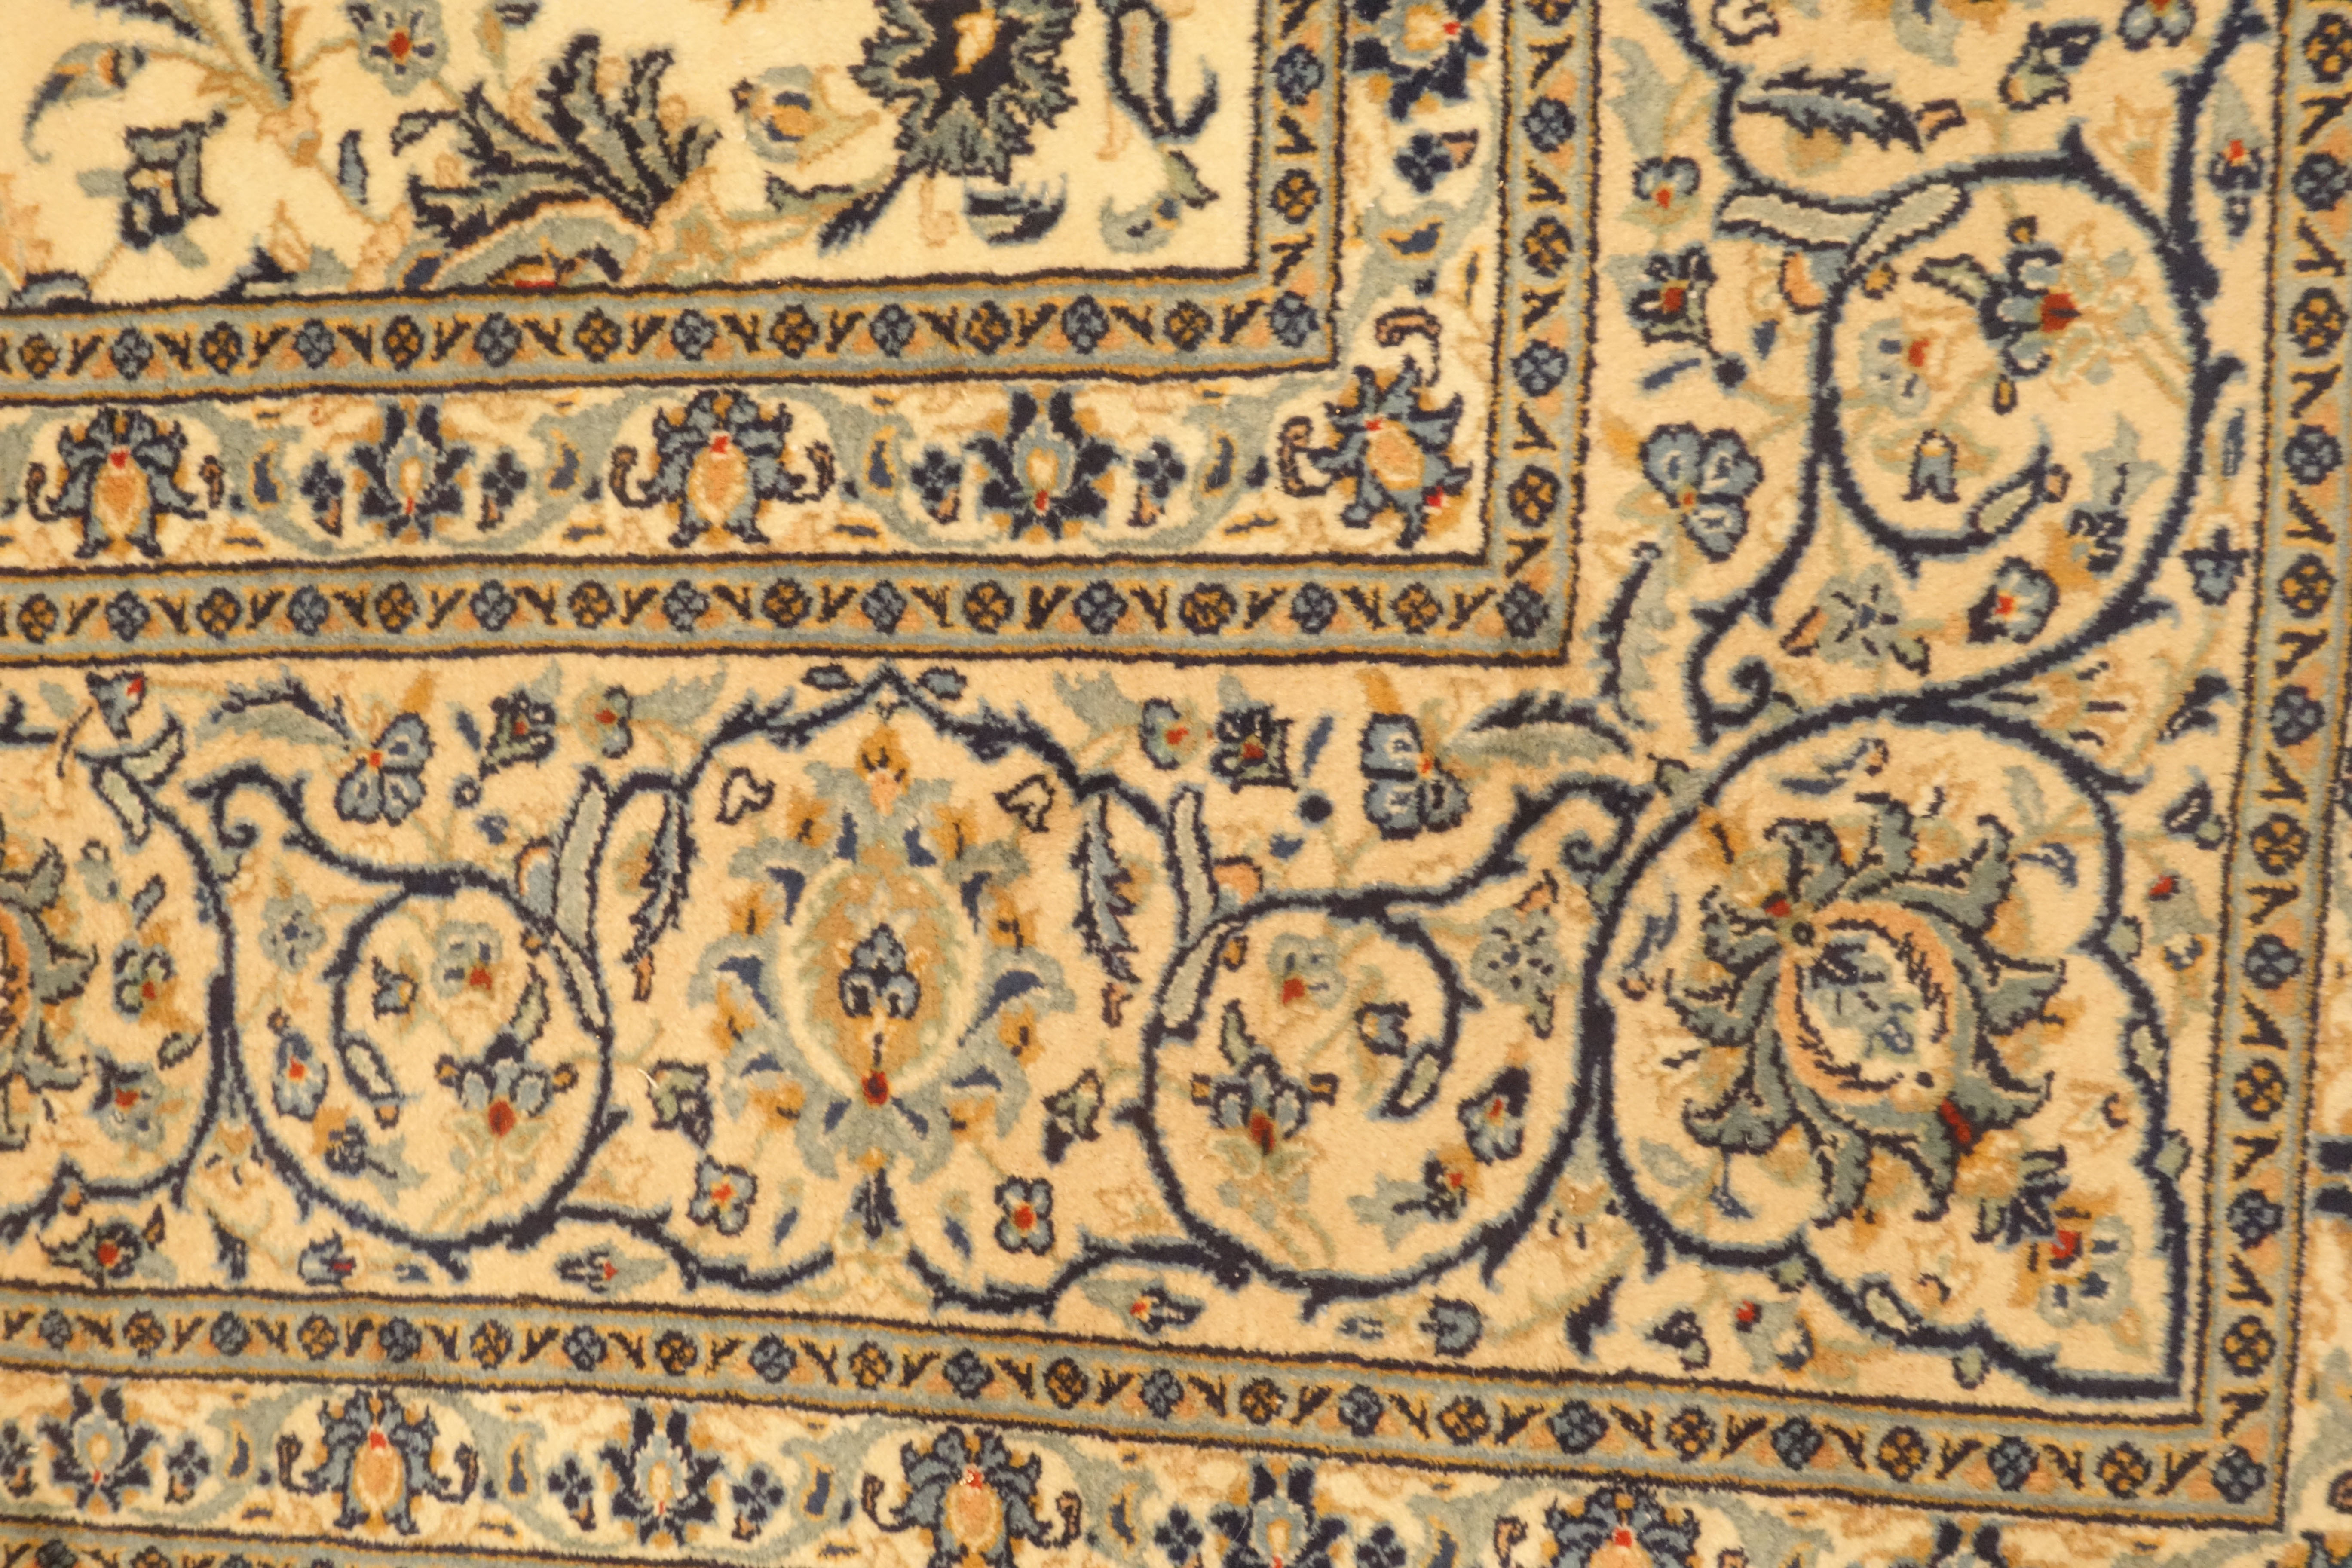 Persian Kashan carpet, ivory ground with blue interlacing overall design, repeating scroll border, - Image 2 of 4